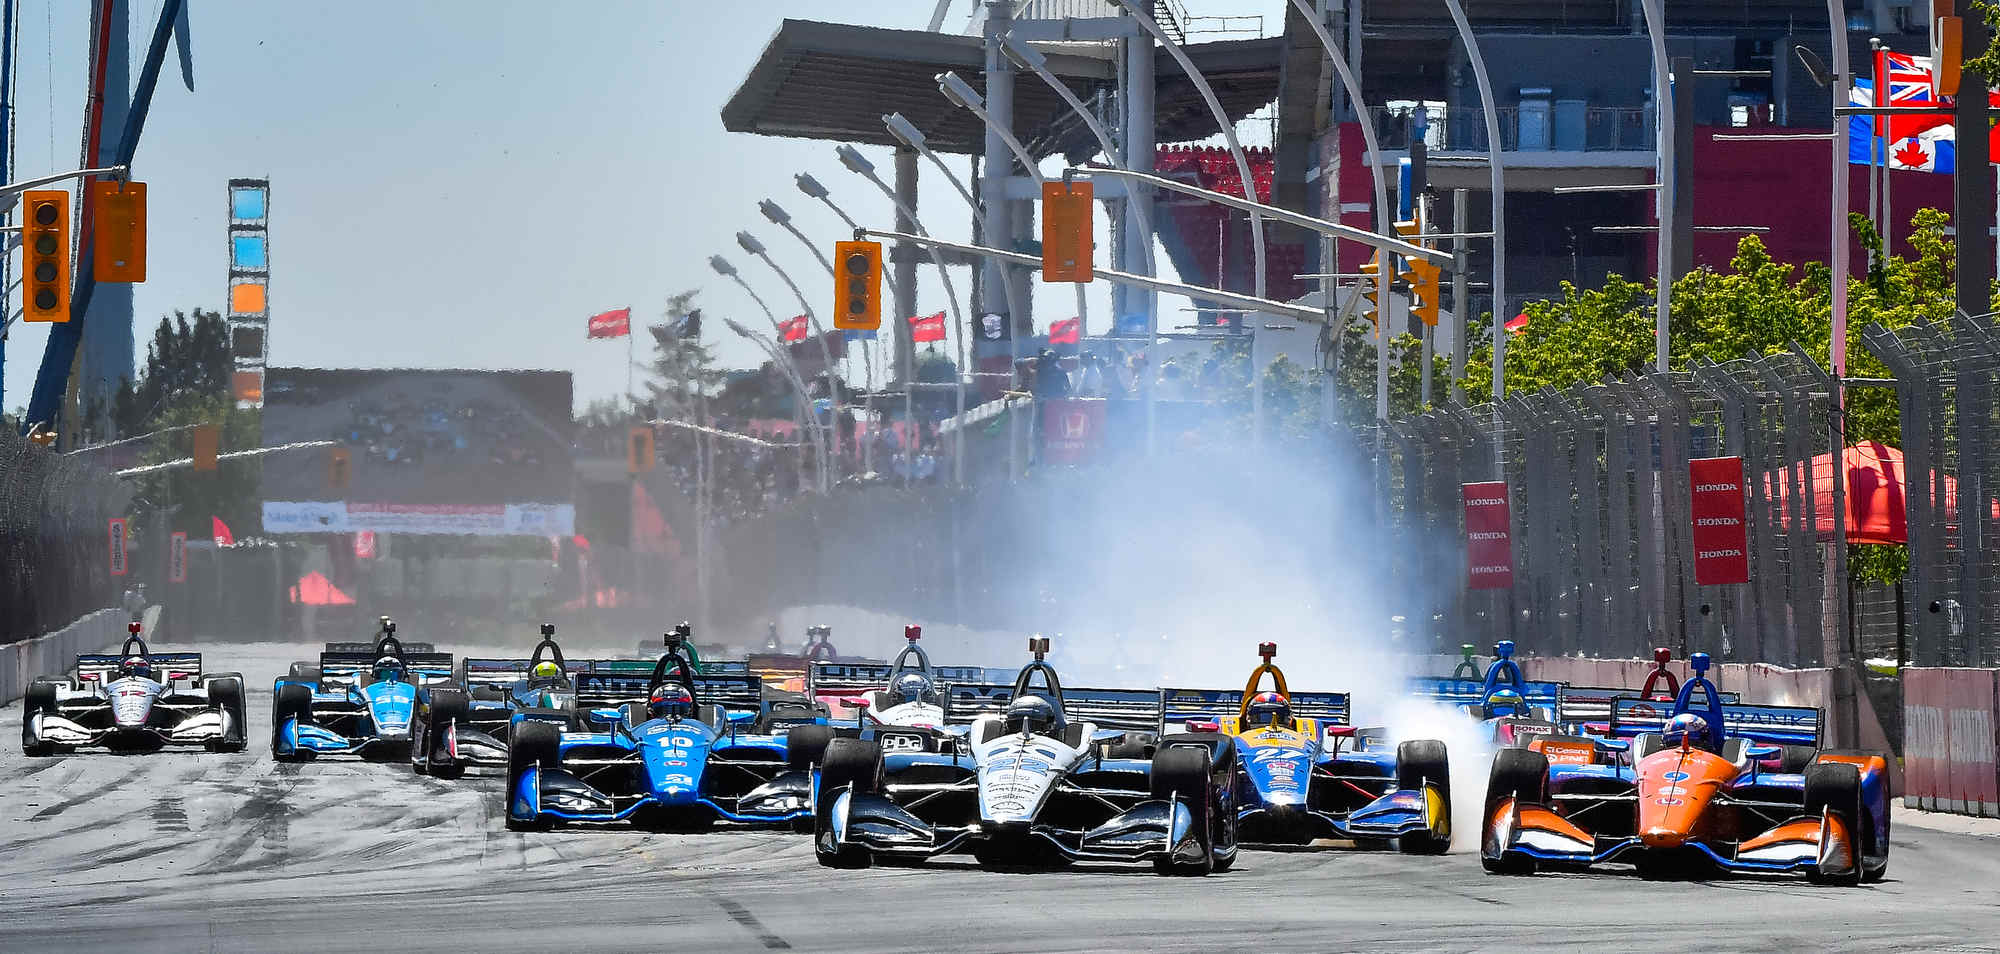 The Toronto IndyCar race could be in jeopardy for 2020